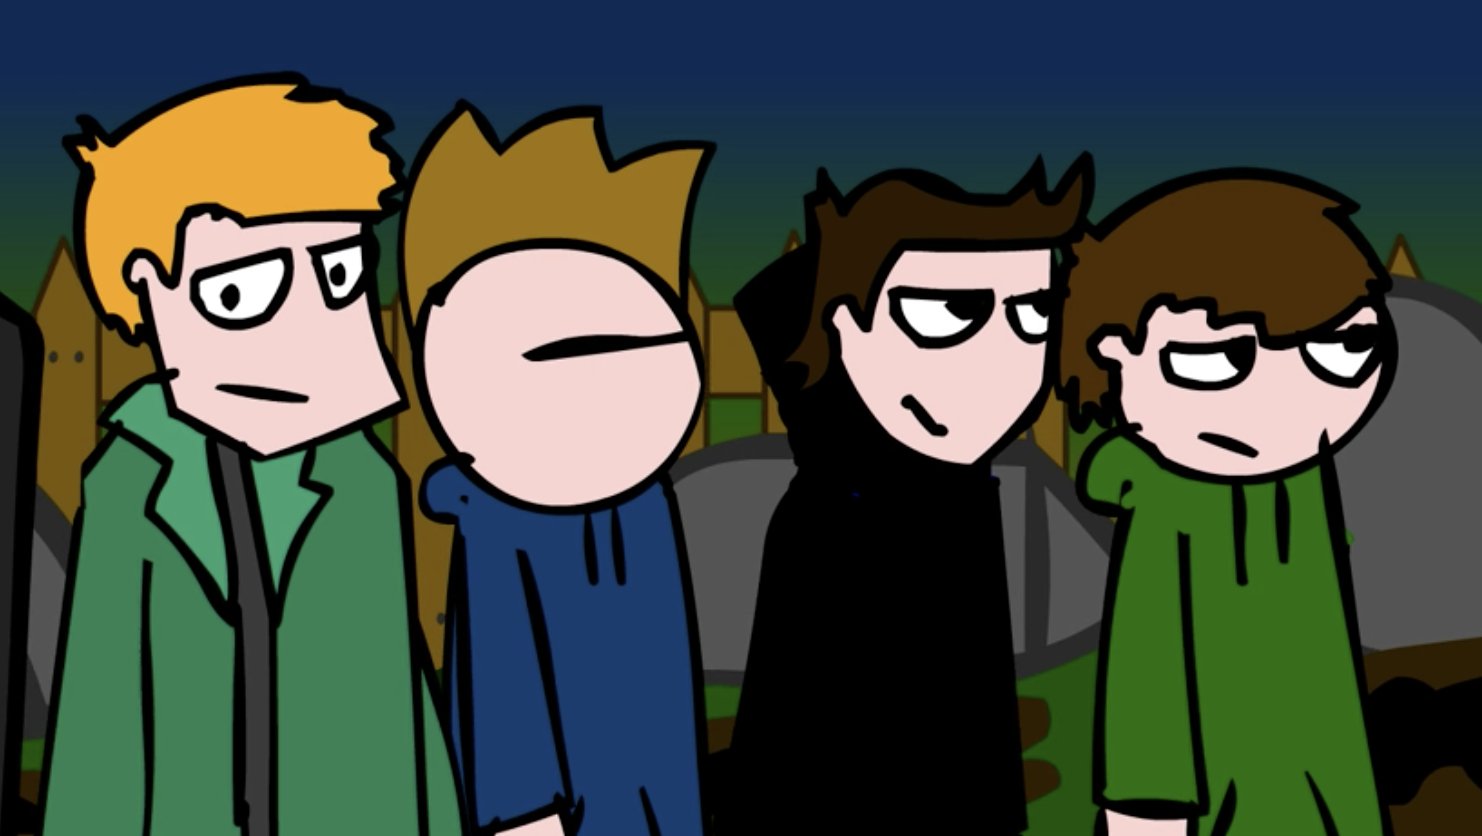 Eddsworld Facts on X: In really early Eddsworld videos, Tord wore